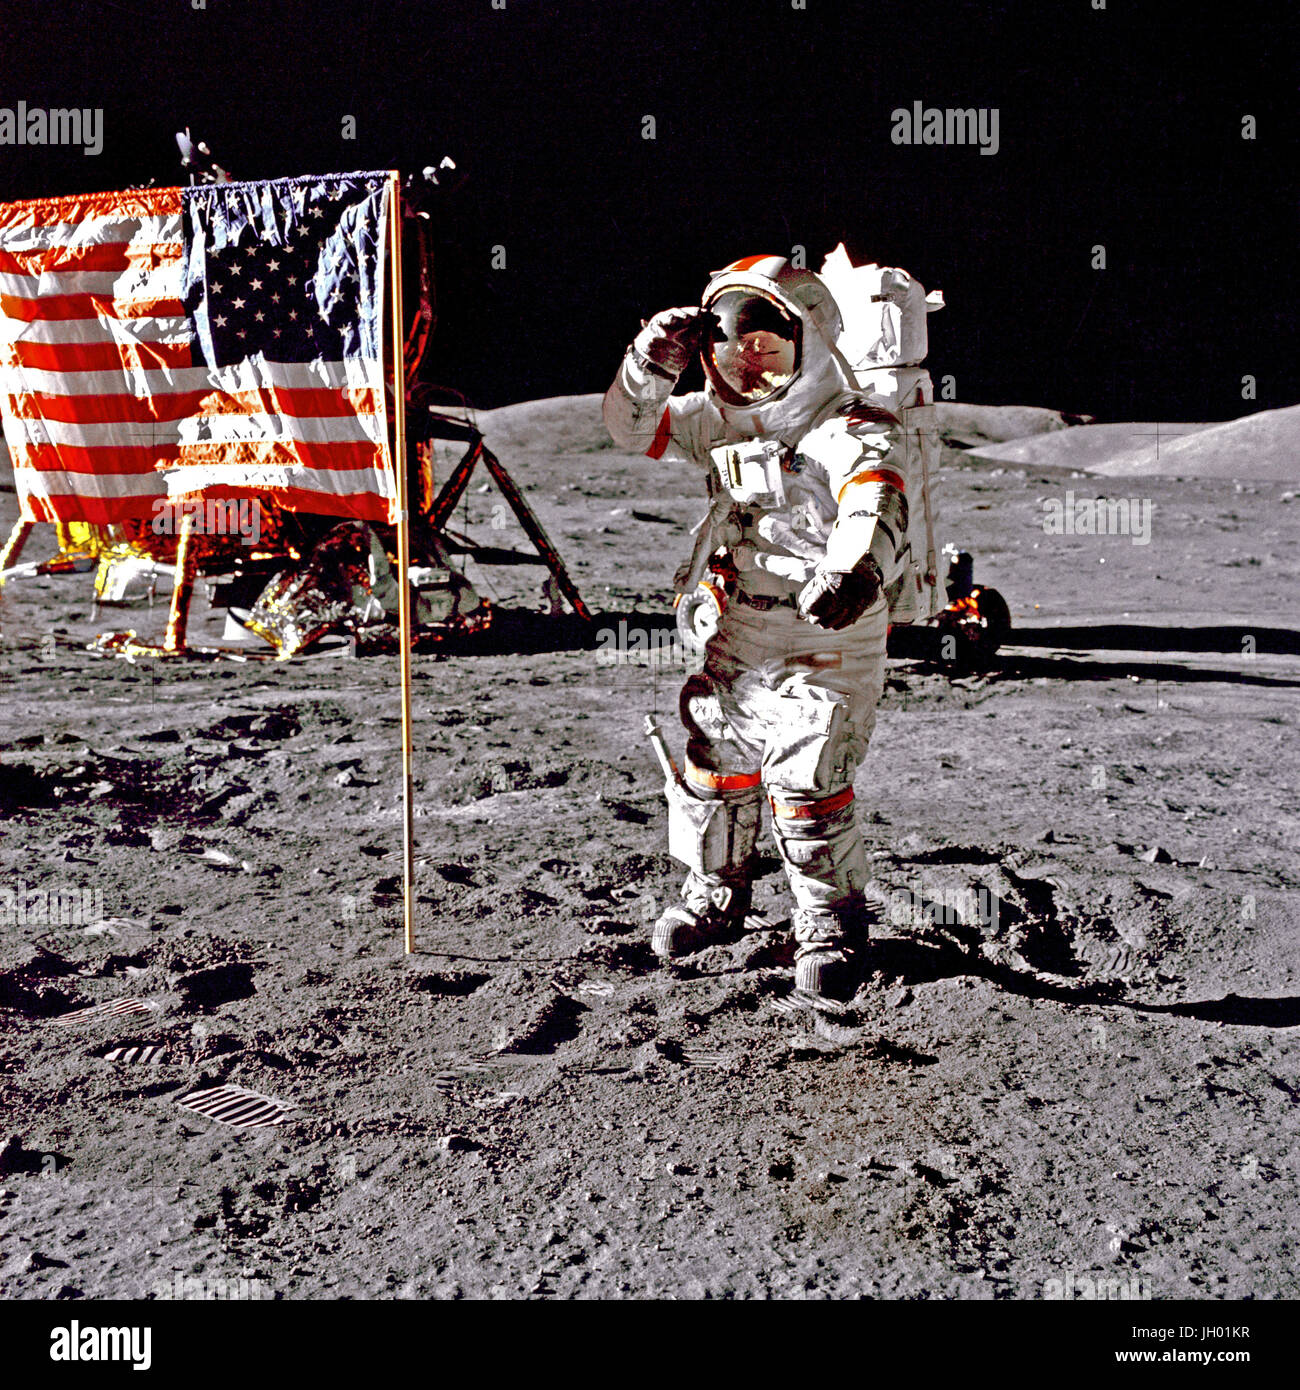 Eugene A. Cernan, Commander, Apollo 17 salutes the flag on the lunar surface during extravehicular activity (EVA) on NASA's final lunar landing mission. The Lunar Module 'Challenger' is in the left background behind the flag and the Lunar Roving Vehicle (LRV) also in background behind him. While astronauts Cernan and Schmitt descended in the Challenger to explore the Taurus-Littrow region of the Moon, astronaut Ronald E. Evans, Command Module pilot, remained with the Command/Service Module (CSM) 'America' in lunar-orbit. Photographer: NASA / Harrison Schmitt Stock Photo